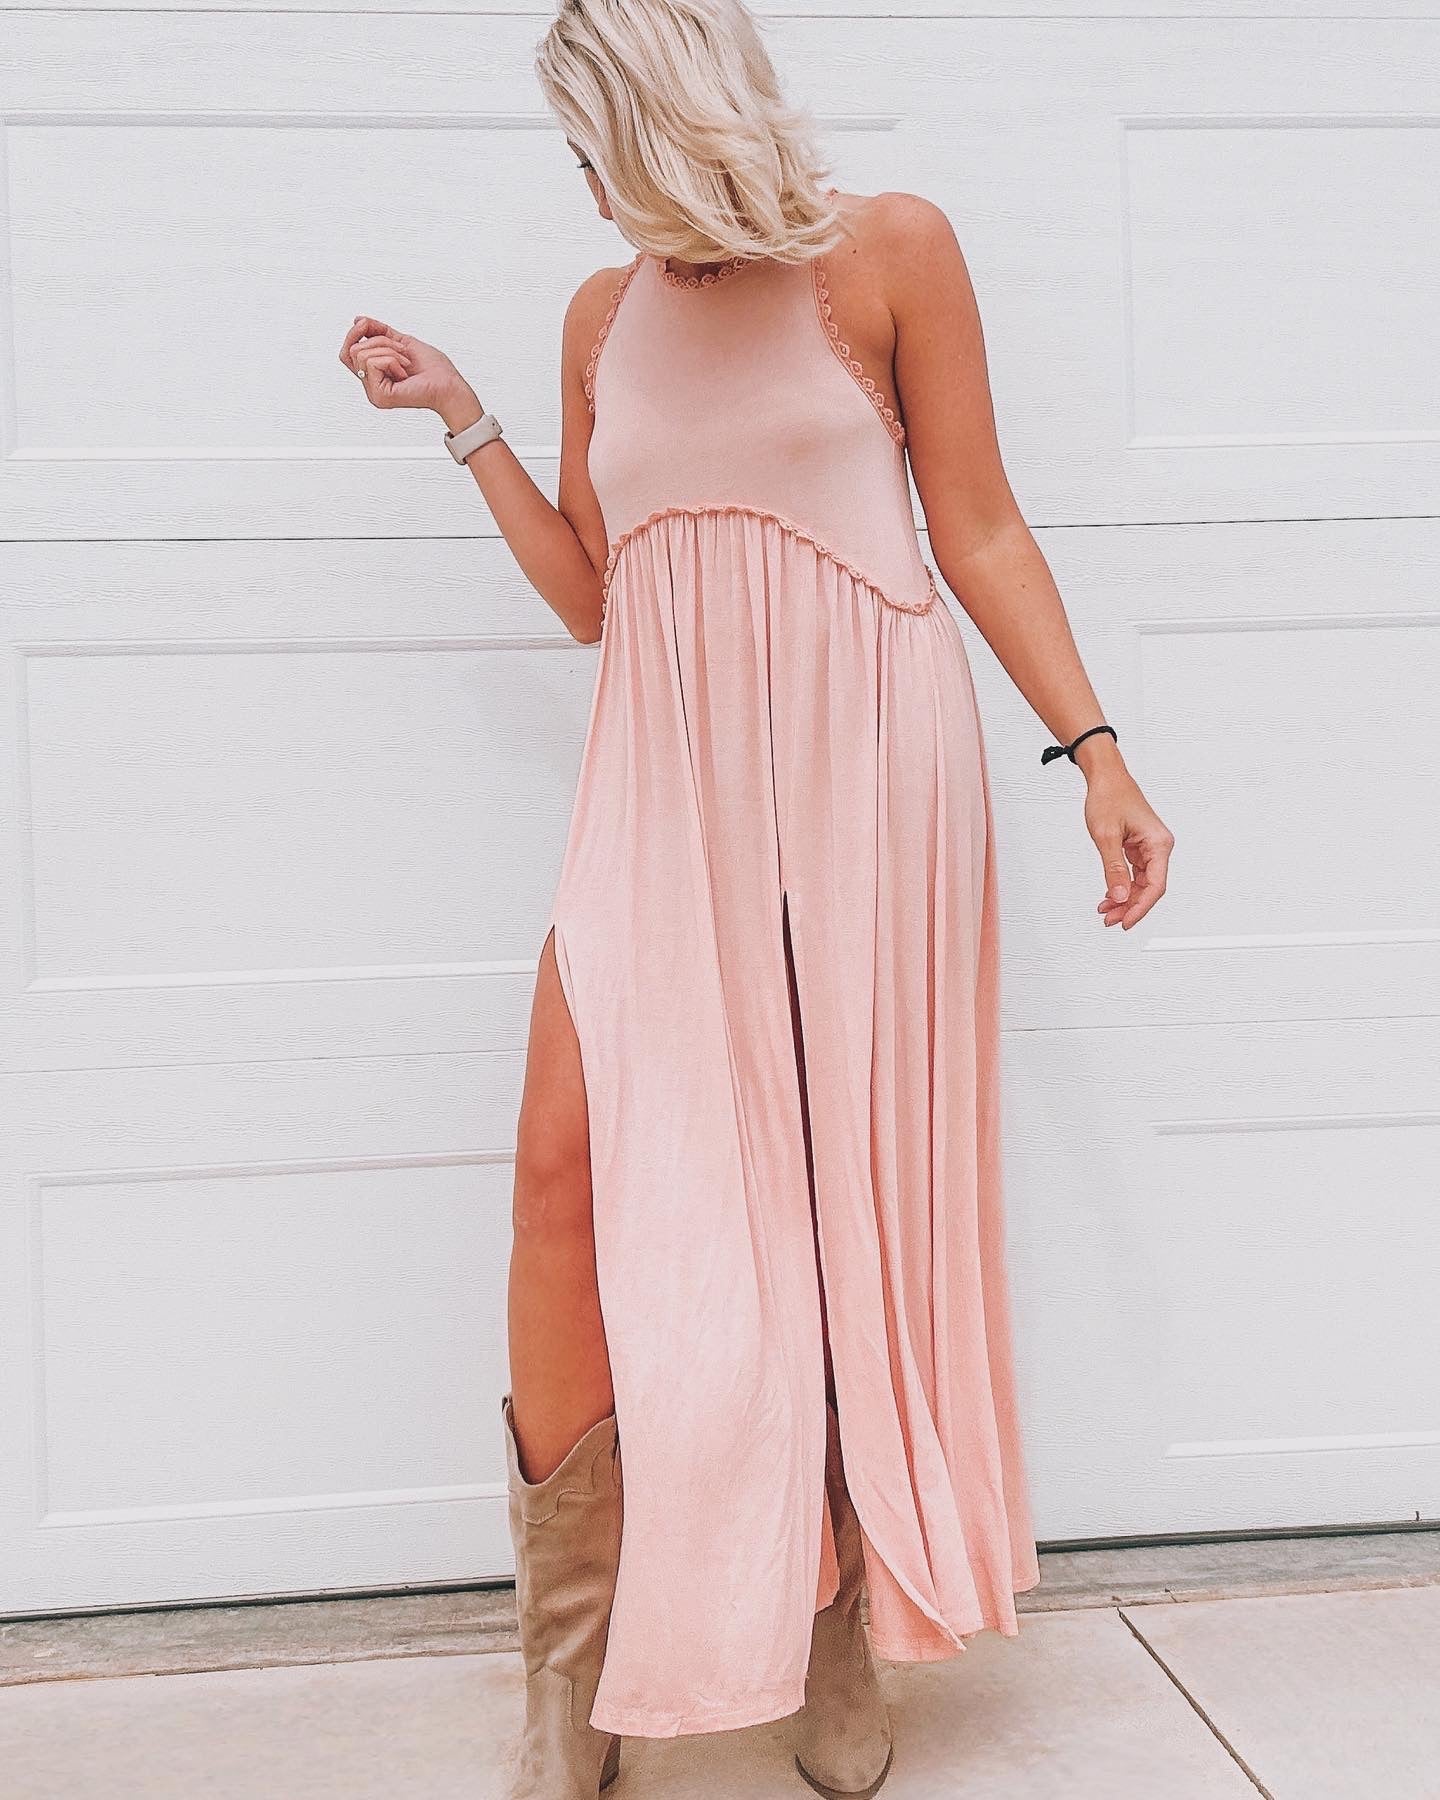 Endless Memories - Sleeveless Maxi Dress - The Shelby Company Tennessee